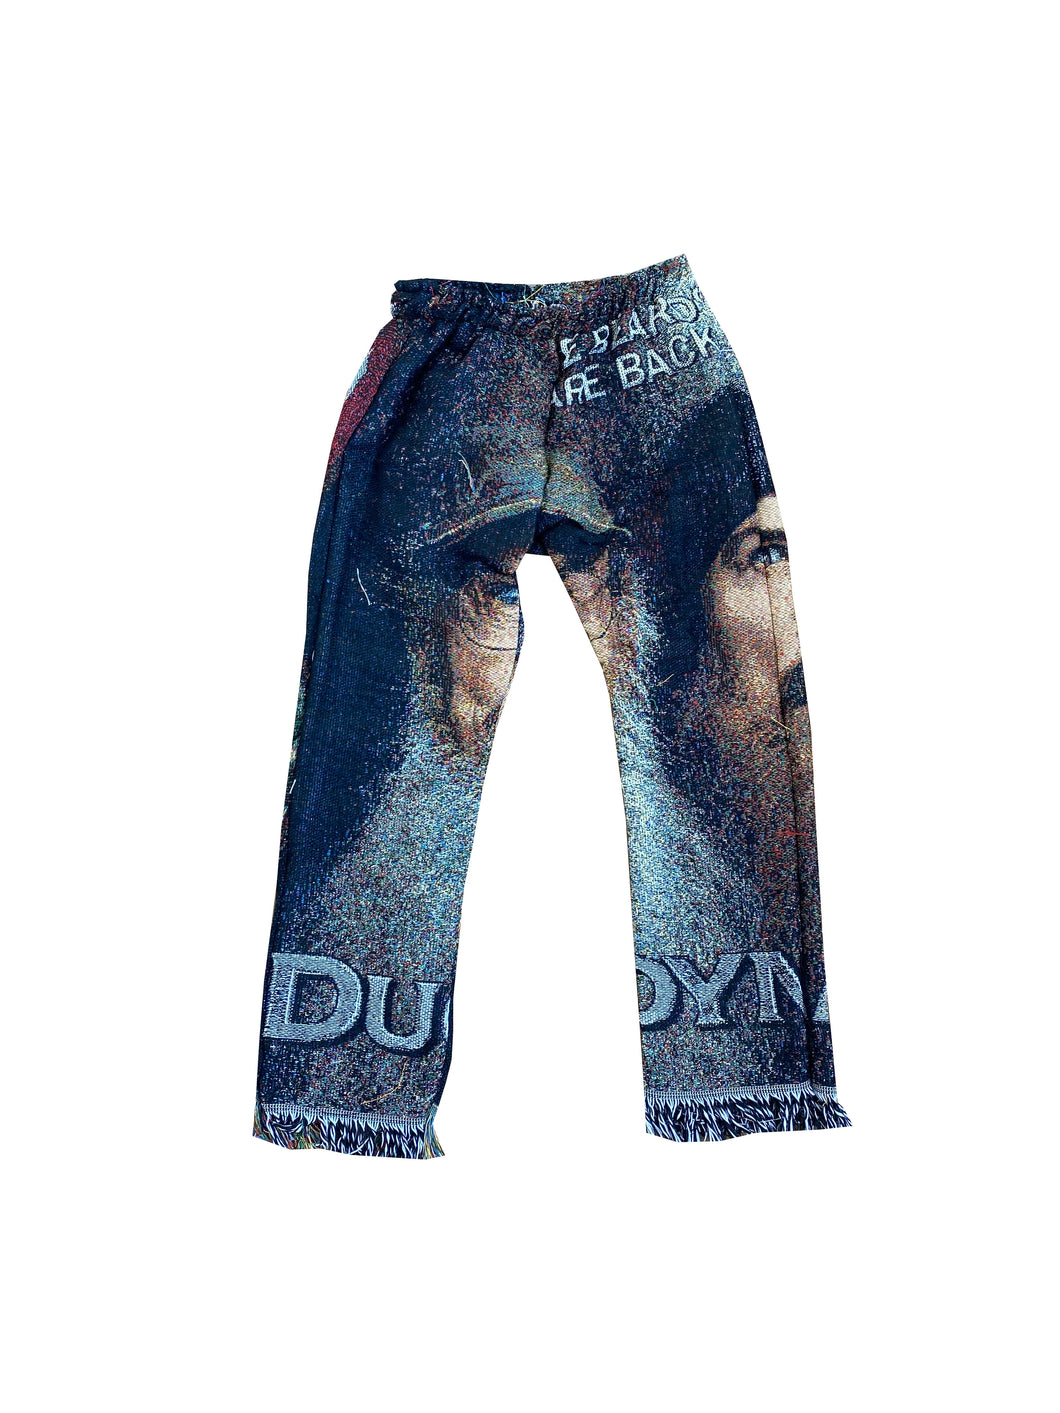 Duck Dynasty Tapestry Sweatpants